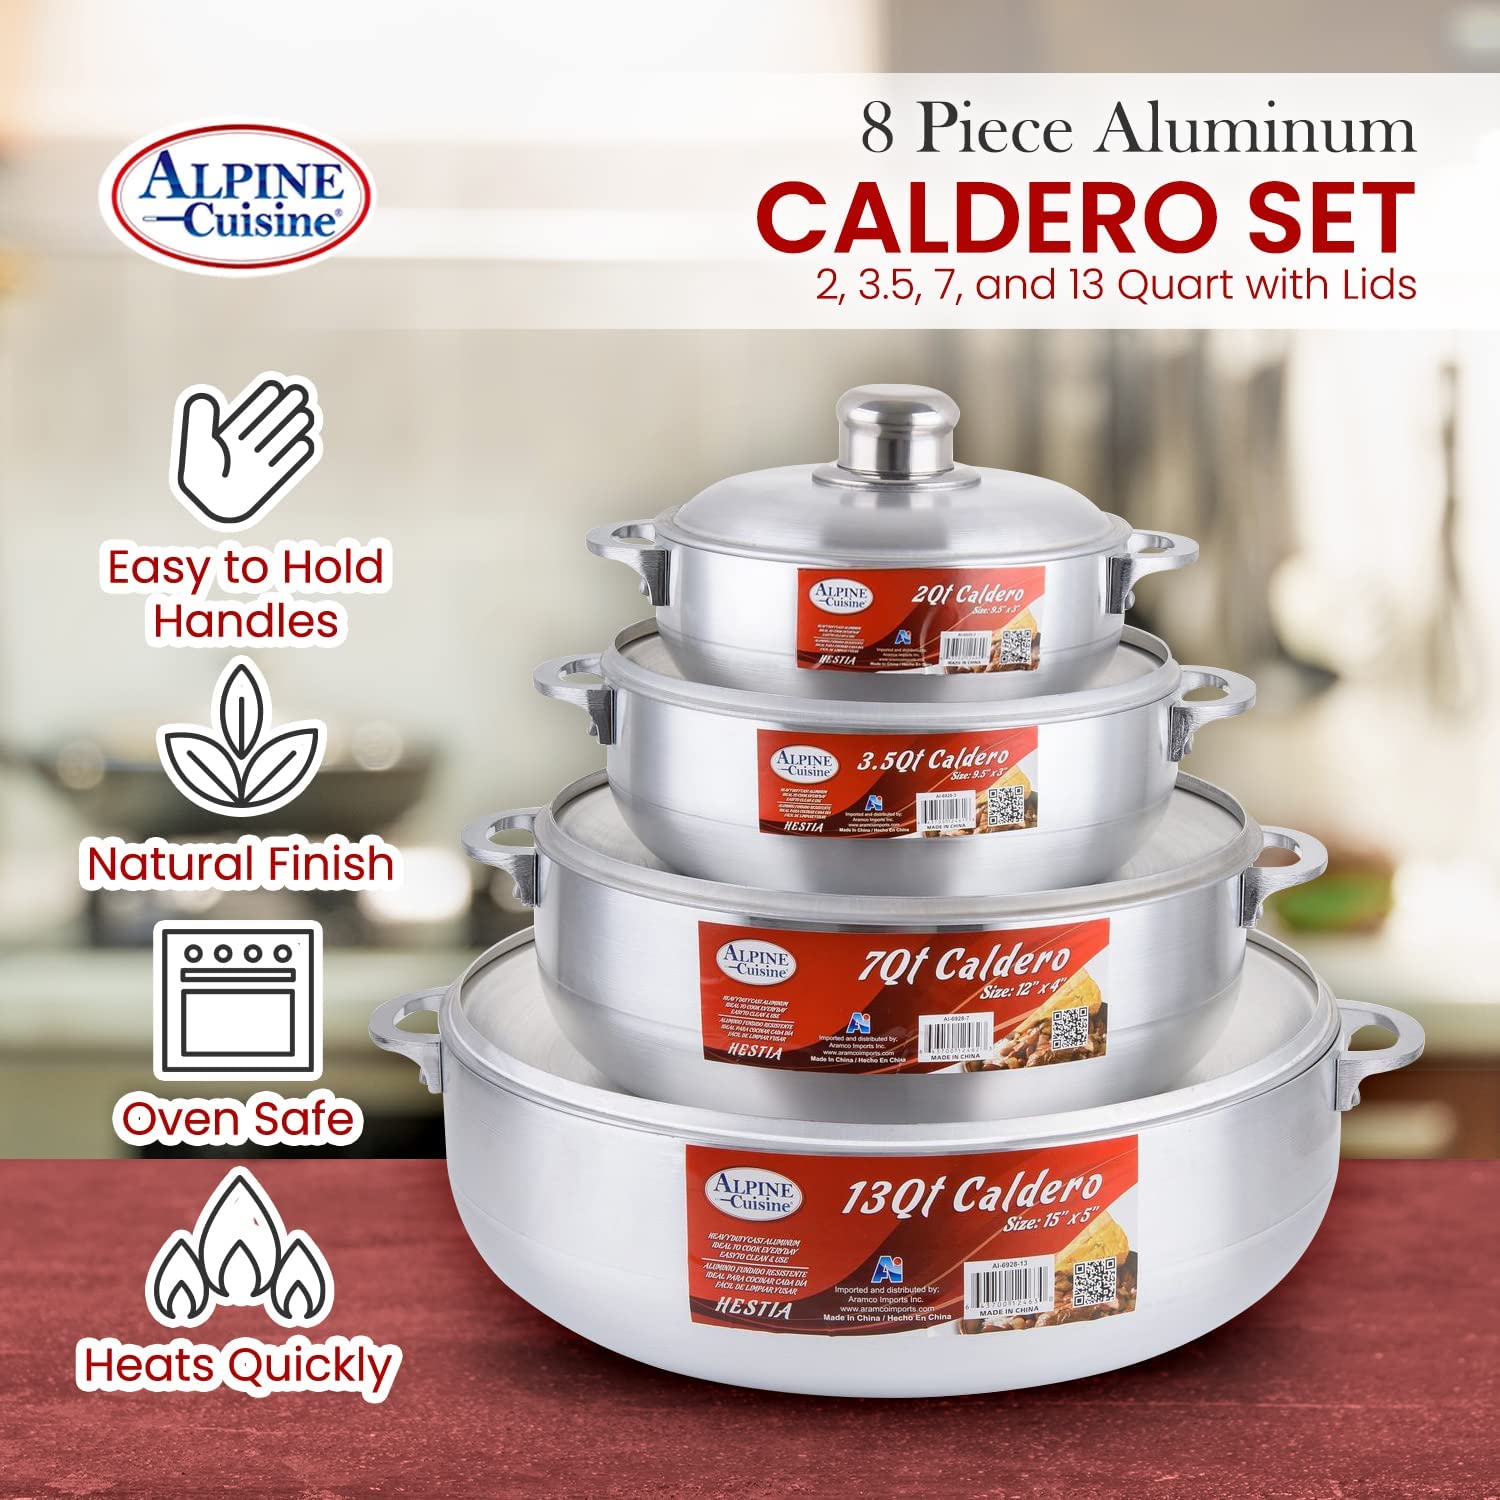 Alpine Cuisine Aluminum Stock Pot 4 Piece Set of 2, 3.5, 5, and 8 Quarts  with Lids and Heat-Resistant Handles| Heavy-Duty Dishwasher Safe Use as